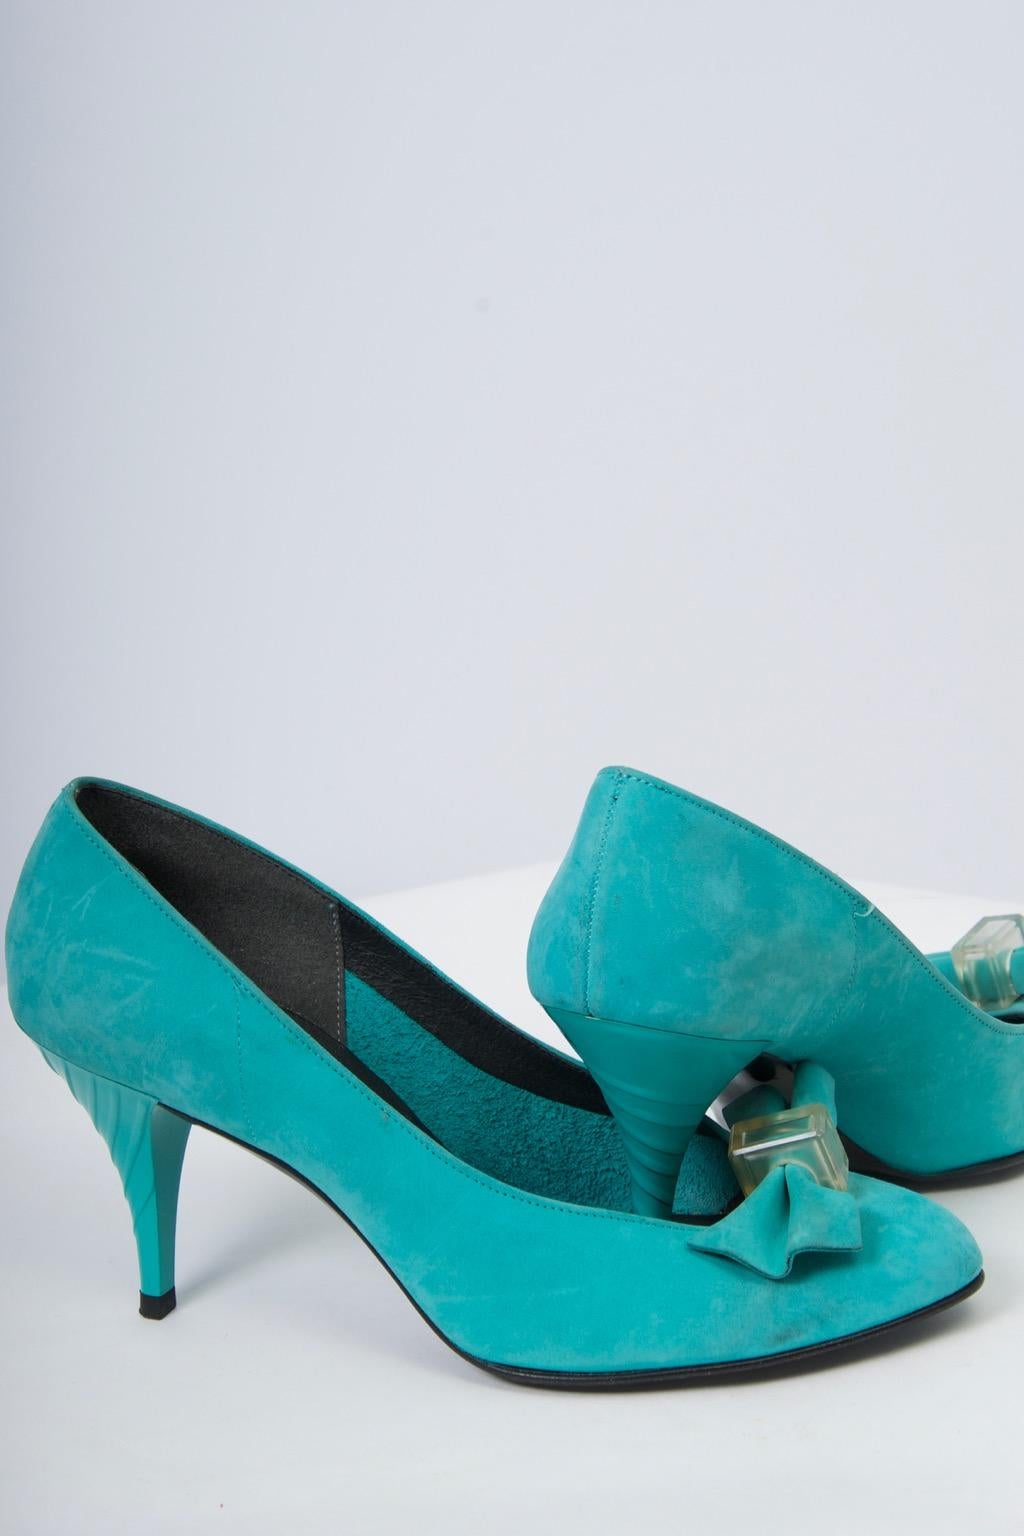 Turquoise suede pumps feature a bow held in middle by lucite element at the low vamp and a sculpted plastic heel. Approximate size 7.